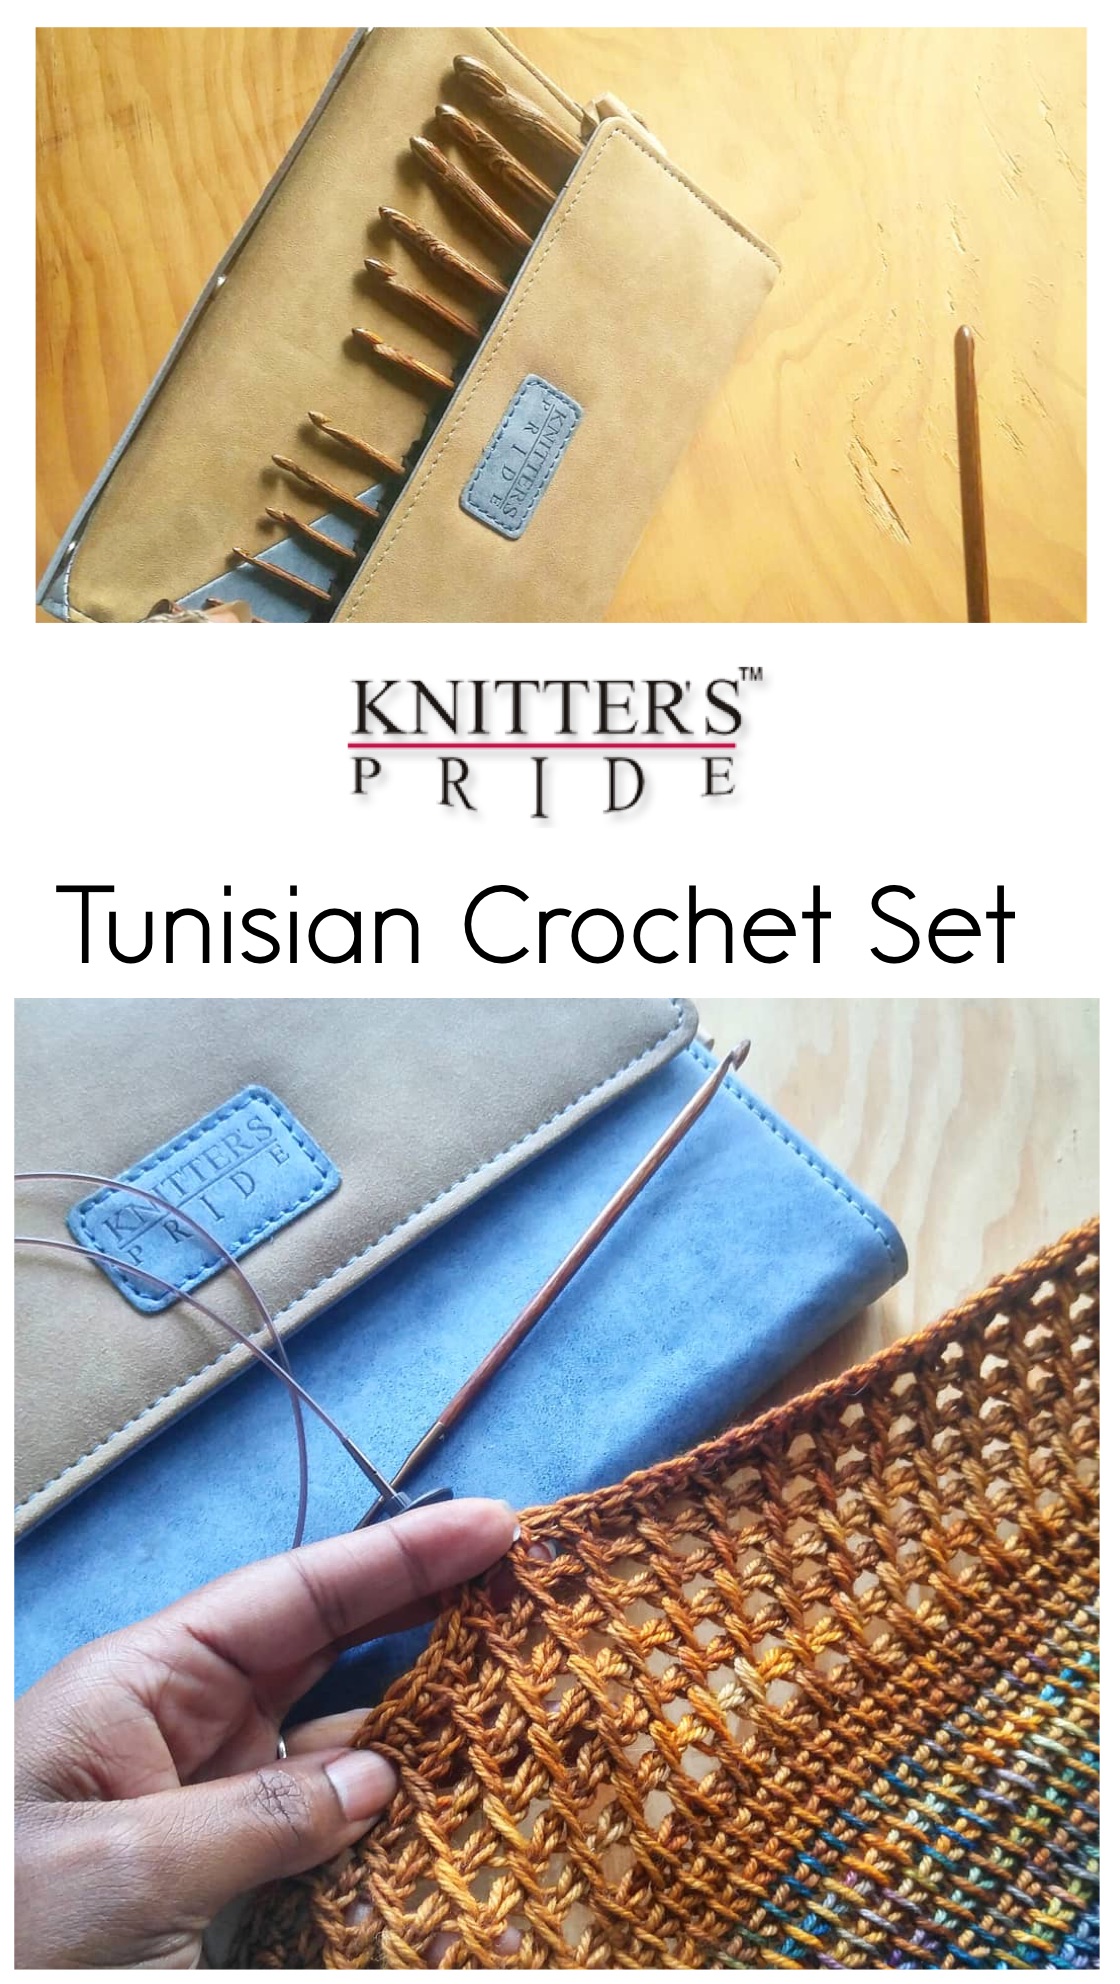 Let's Check Out The Tunisian Crochet Hook Set From Knitter's Pride